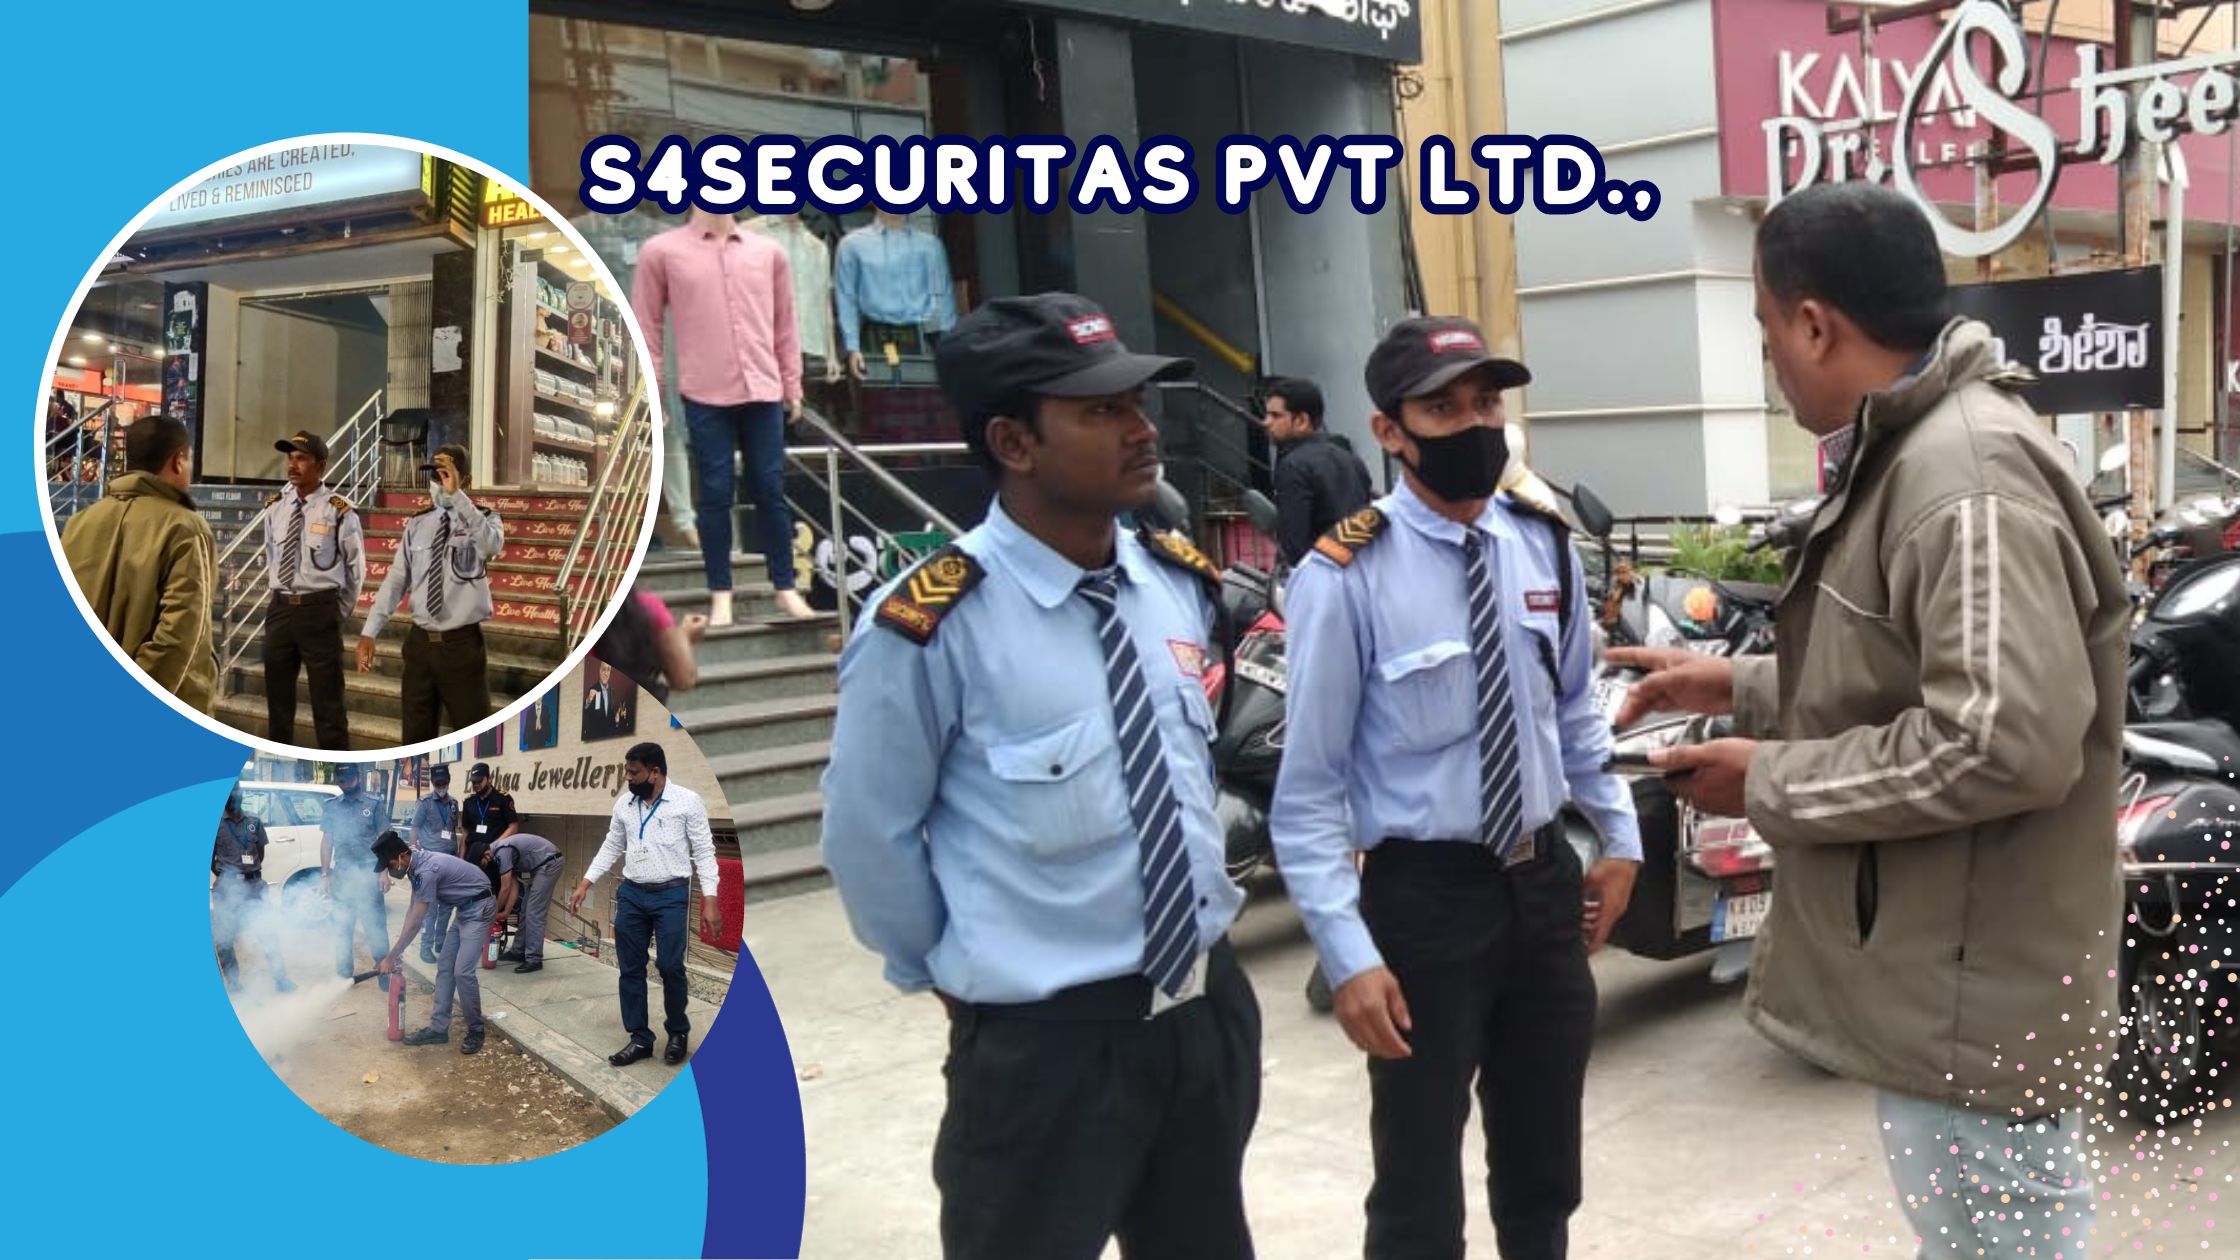 S4SECURITAS PVT LTD - Latest update - Security Guard Services Near Electronic City